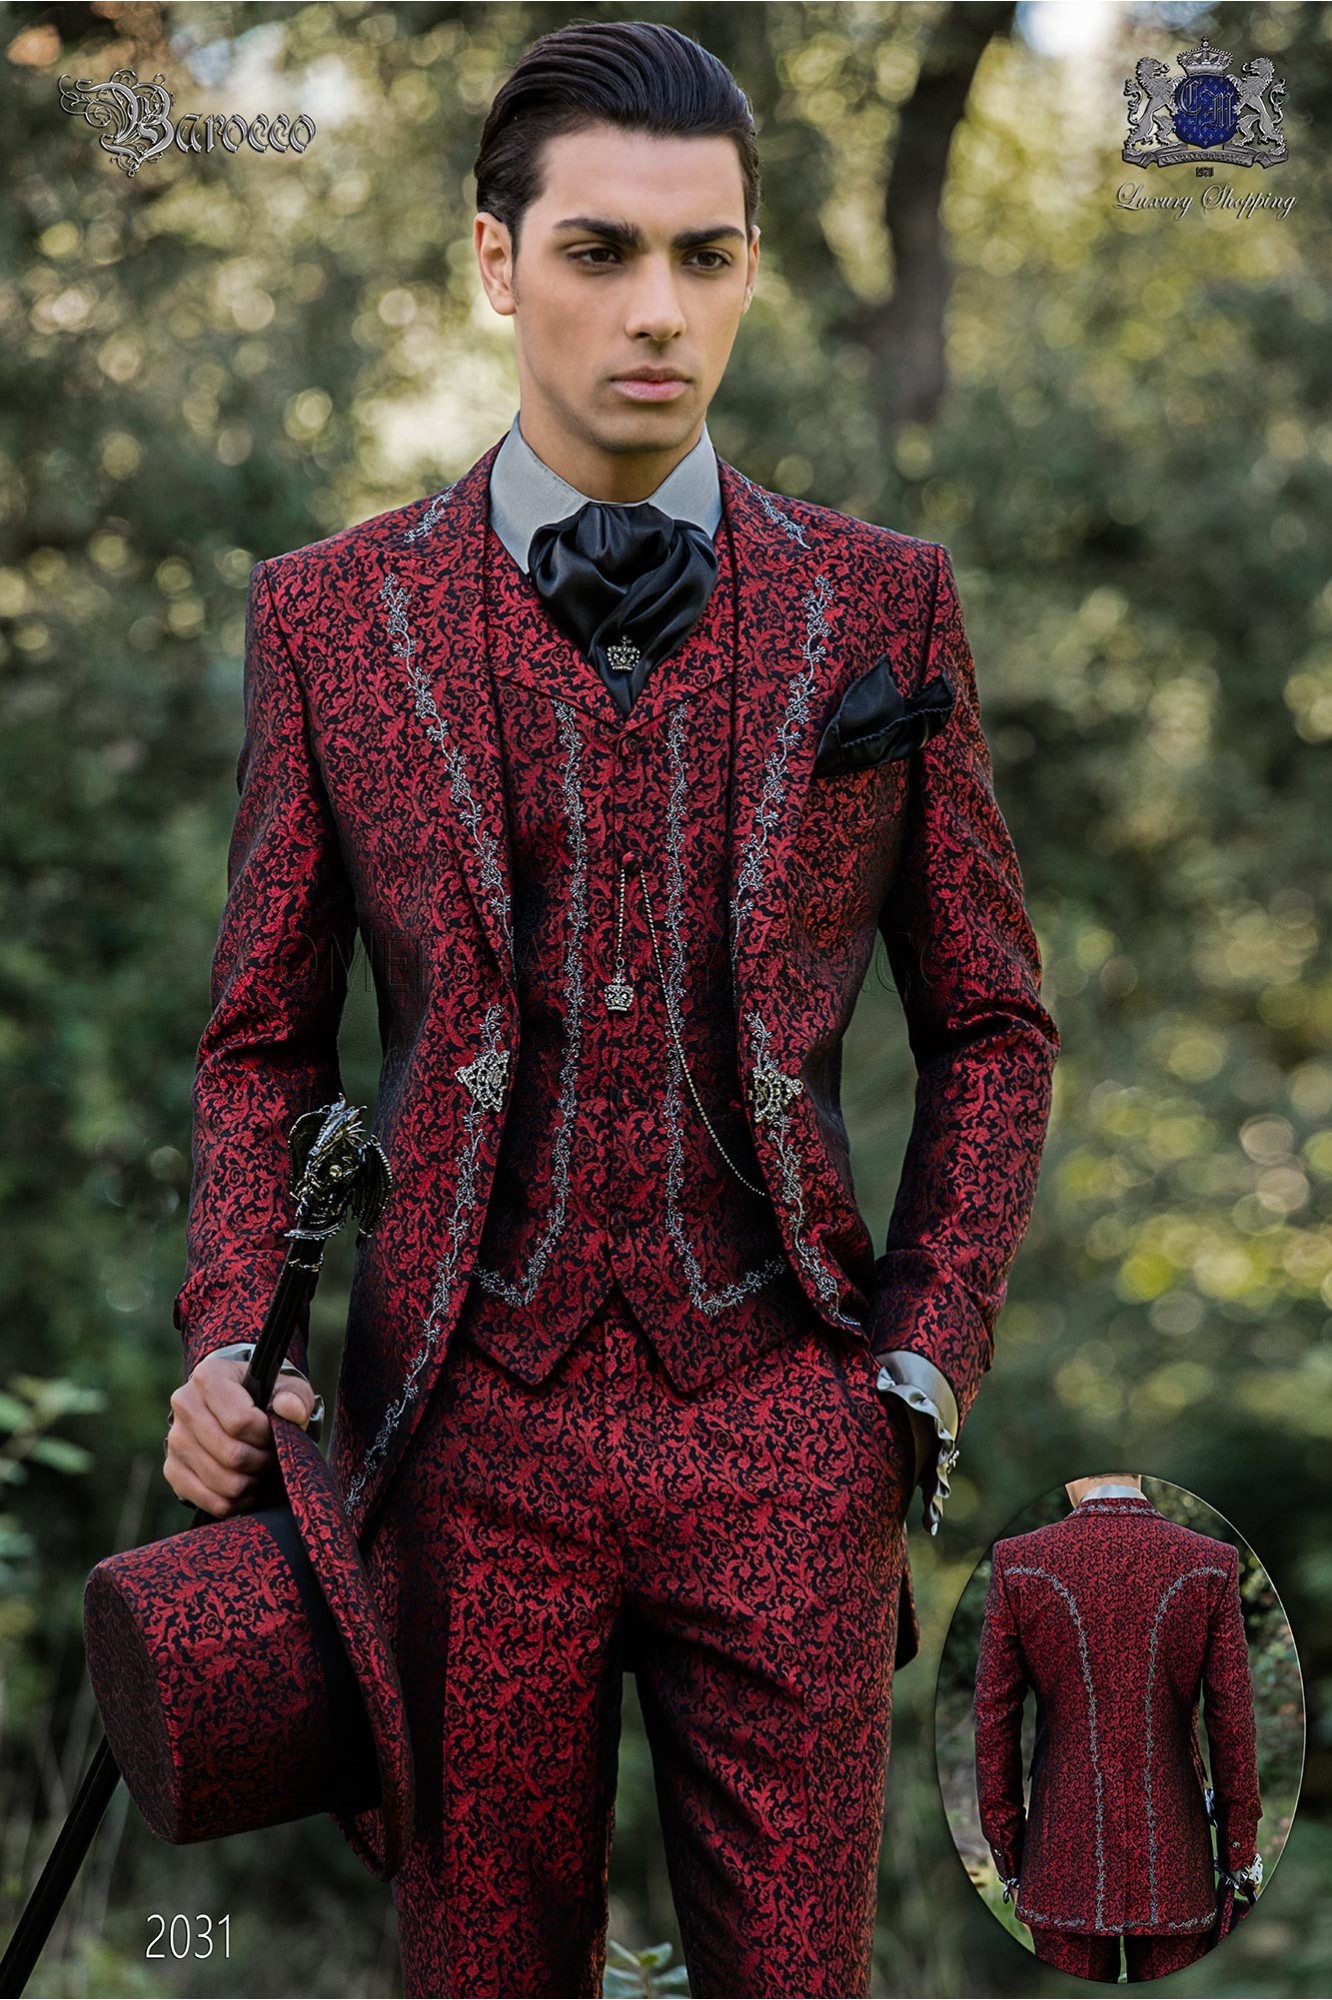 vintage frock coat in red jacquard fabric with silver embroidery and crystal clasp model 2031 Mario Moyano